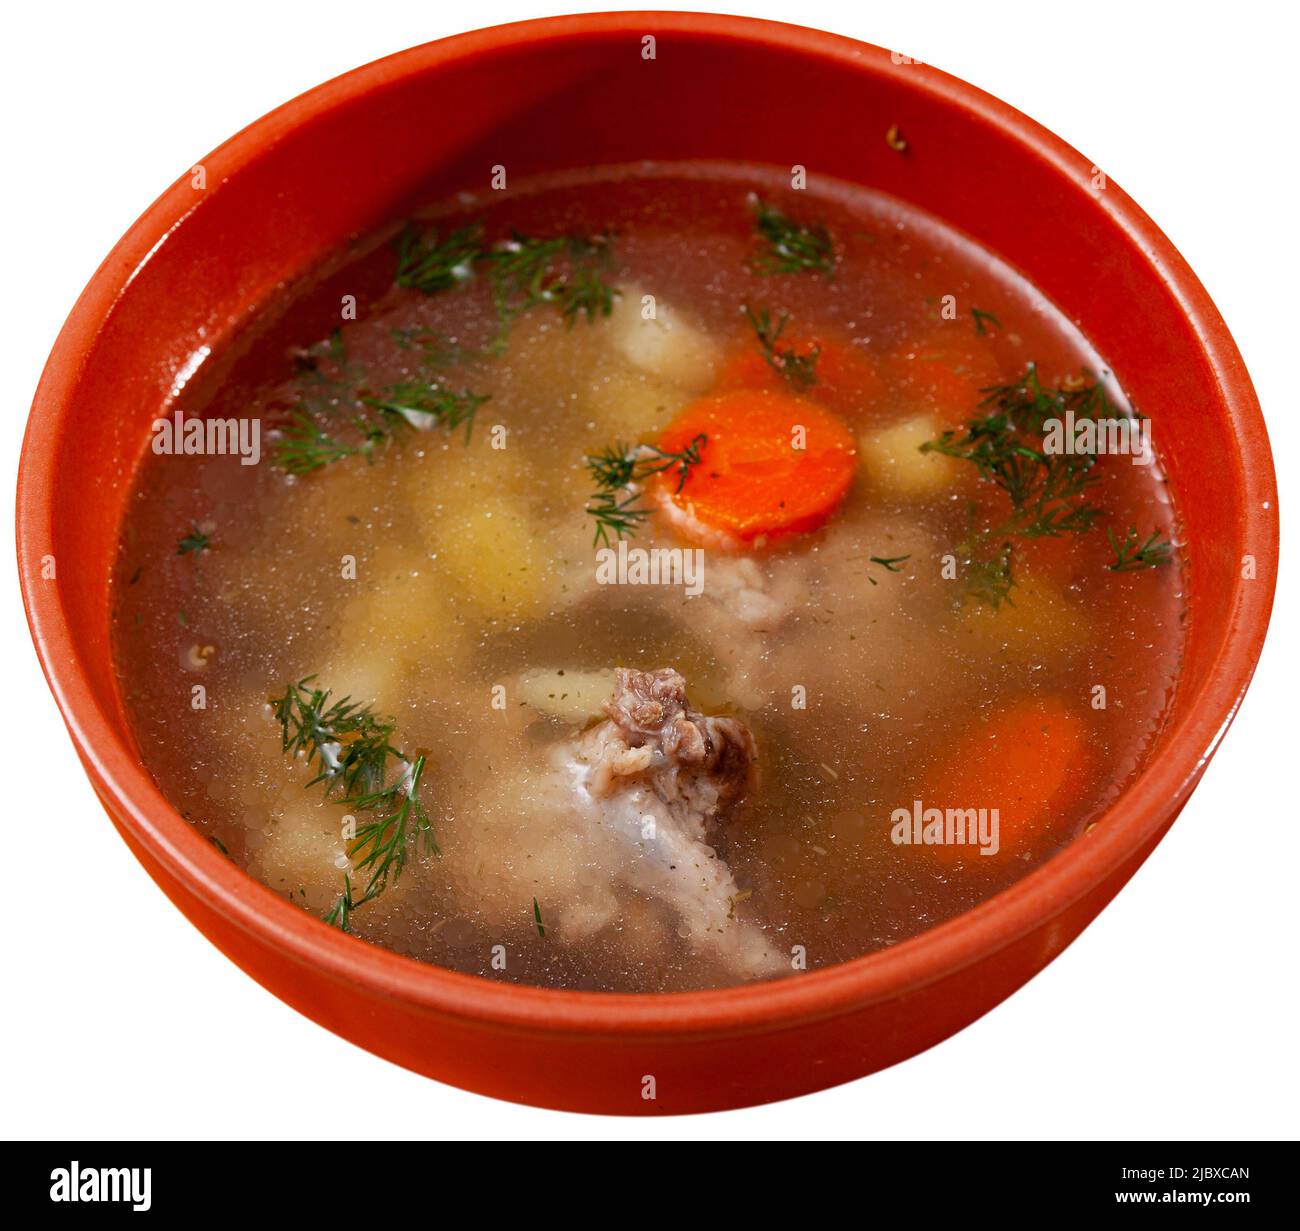 Bowl with meat soup served on white Stock Photo